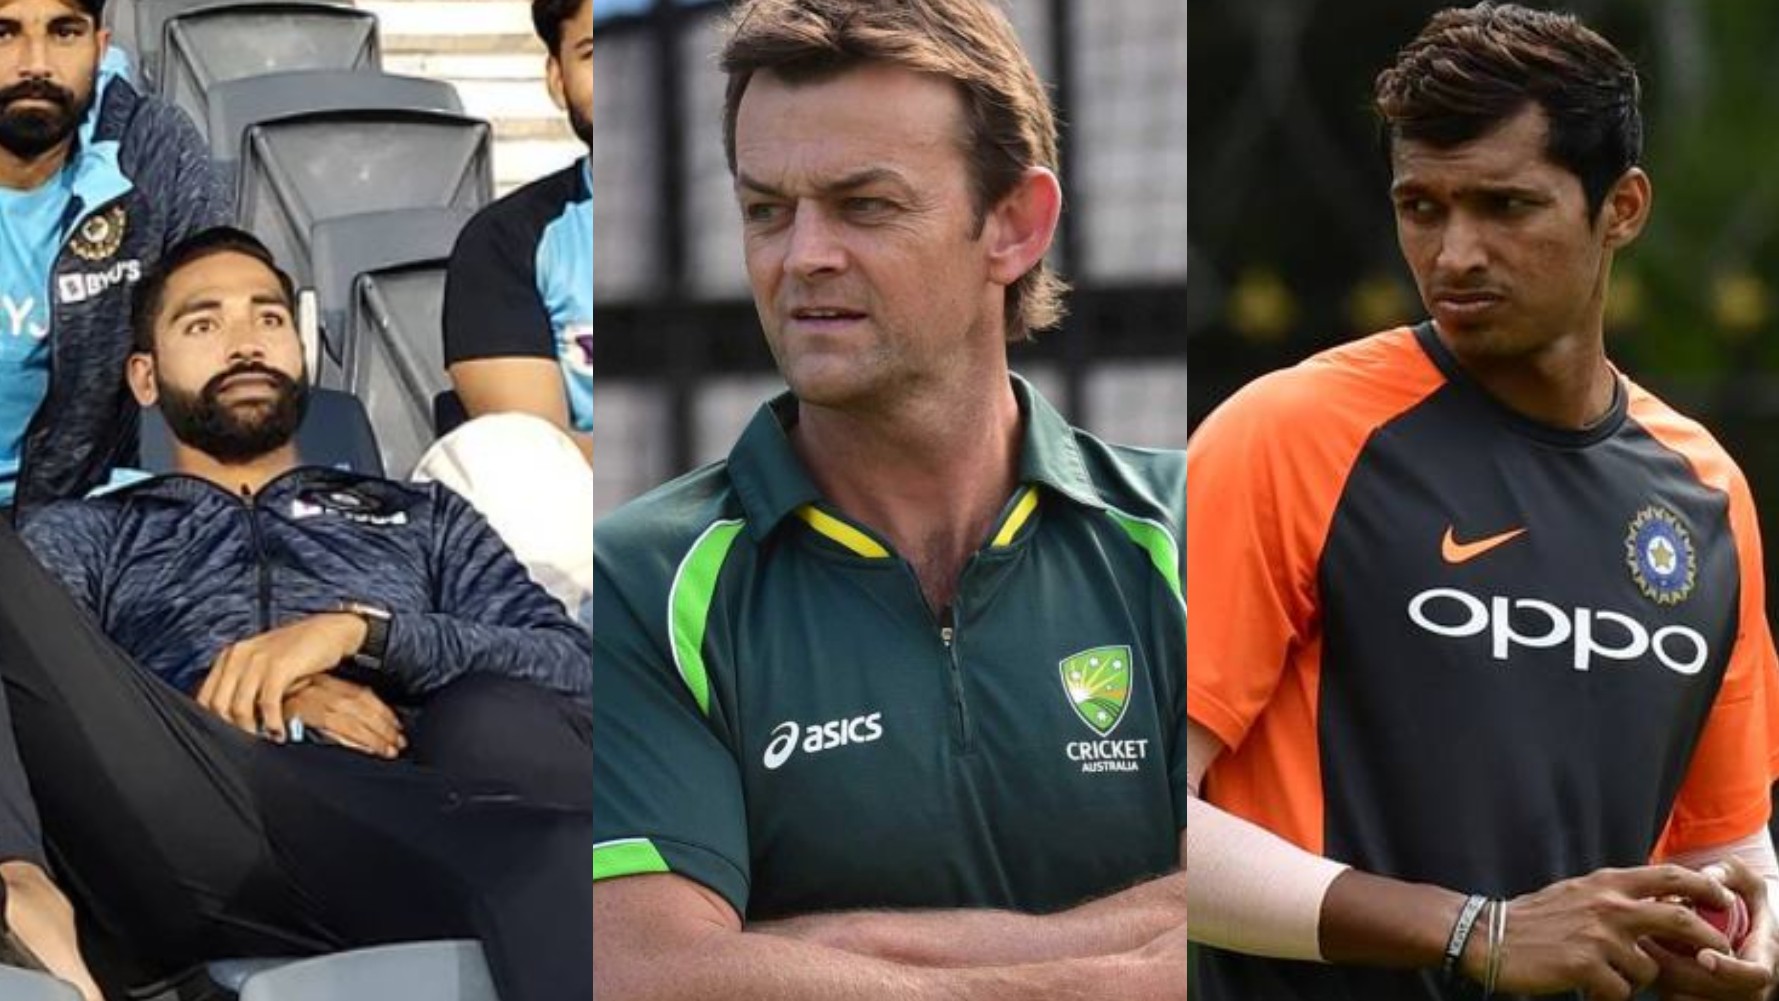 AUS v IND 2020-21: Gilchrist apologizes to Siraj and Saini after his mistake during commentary